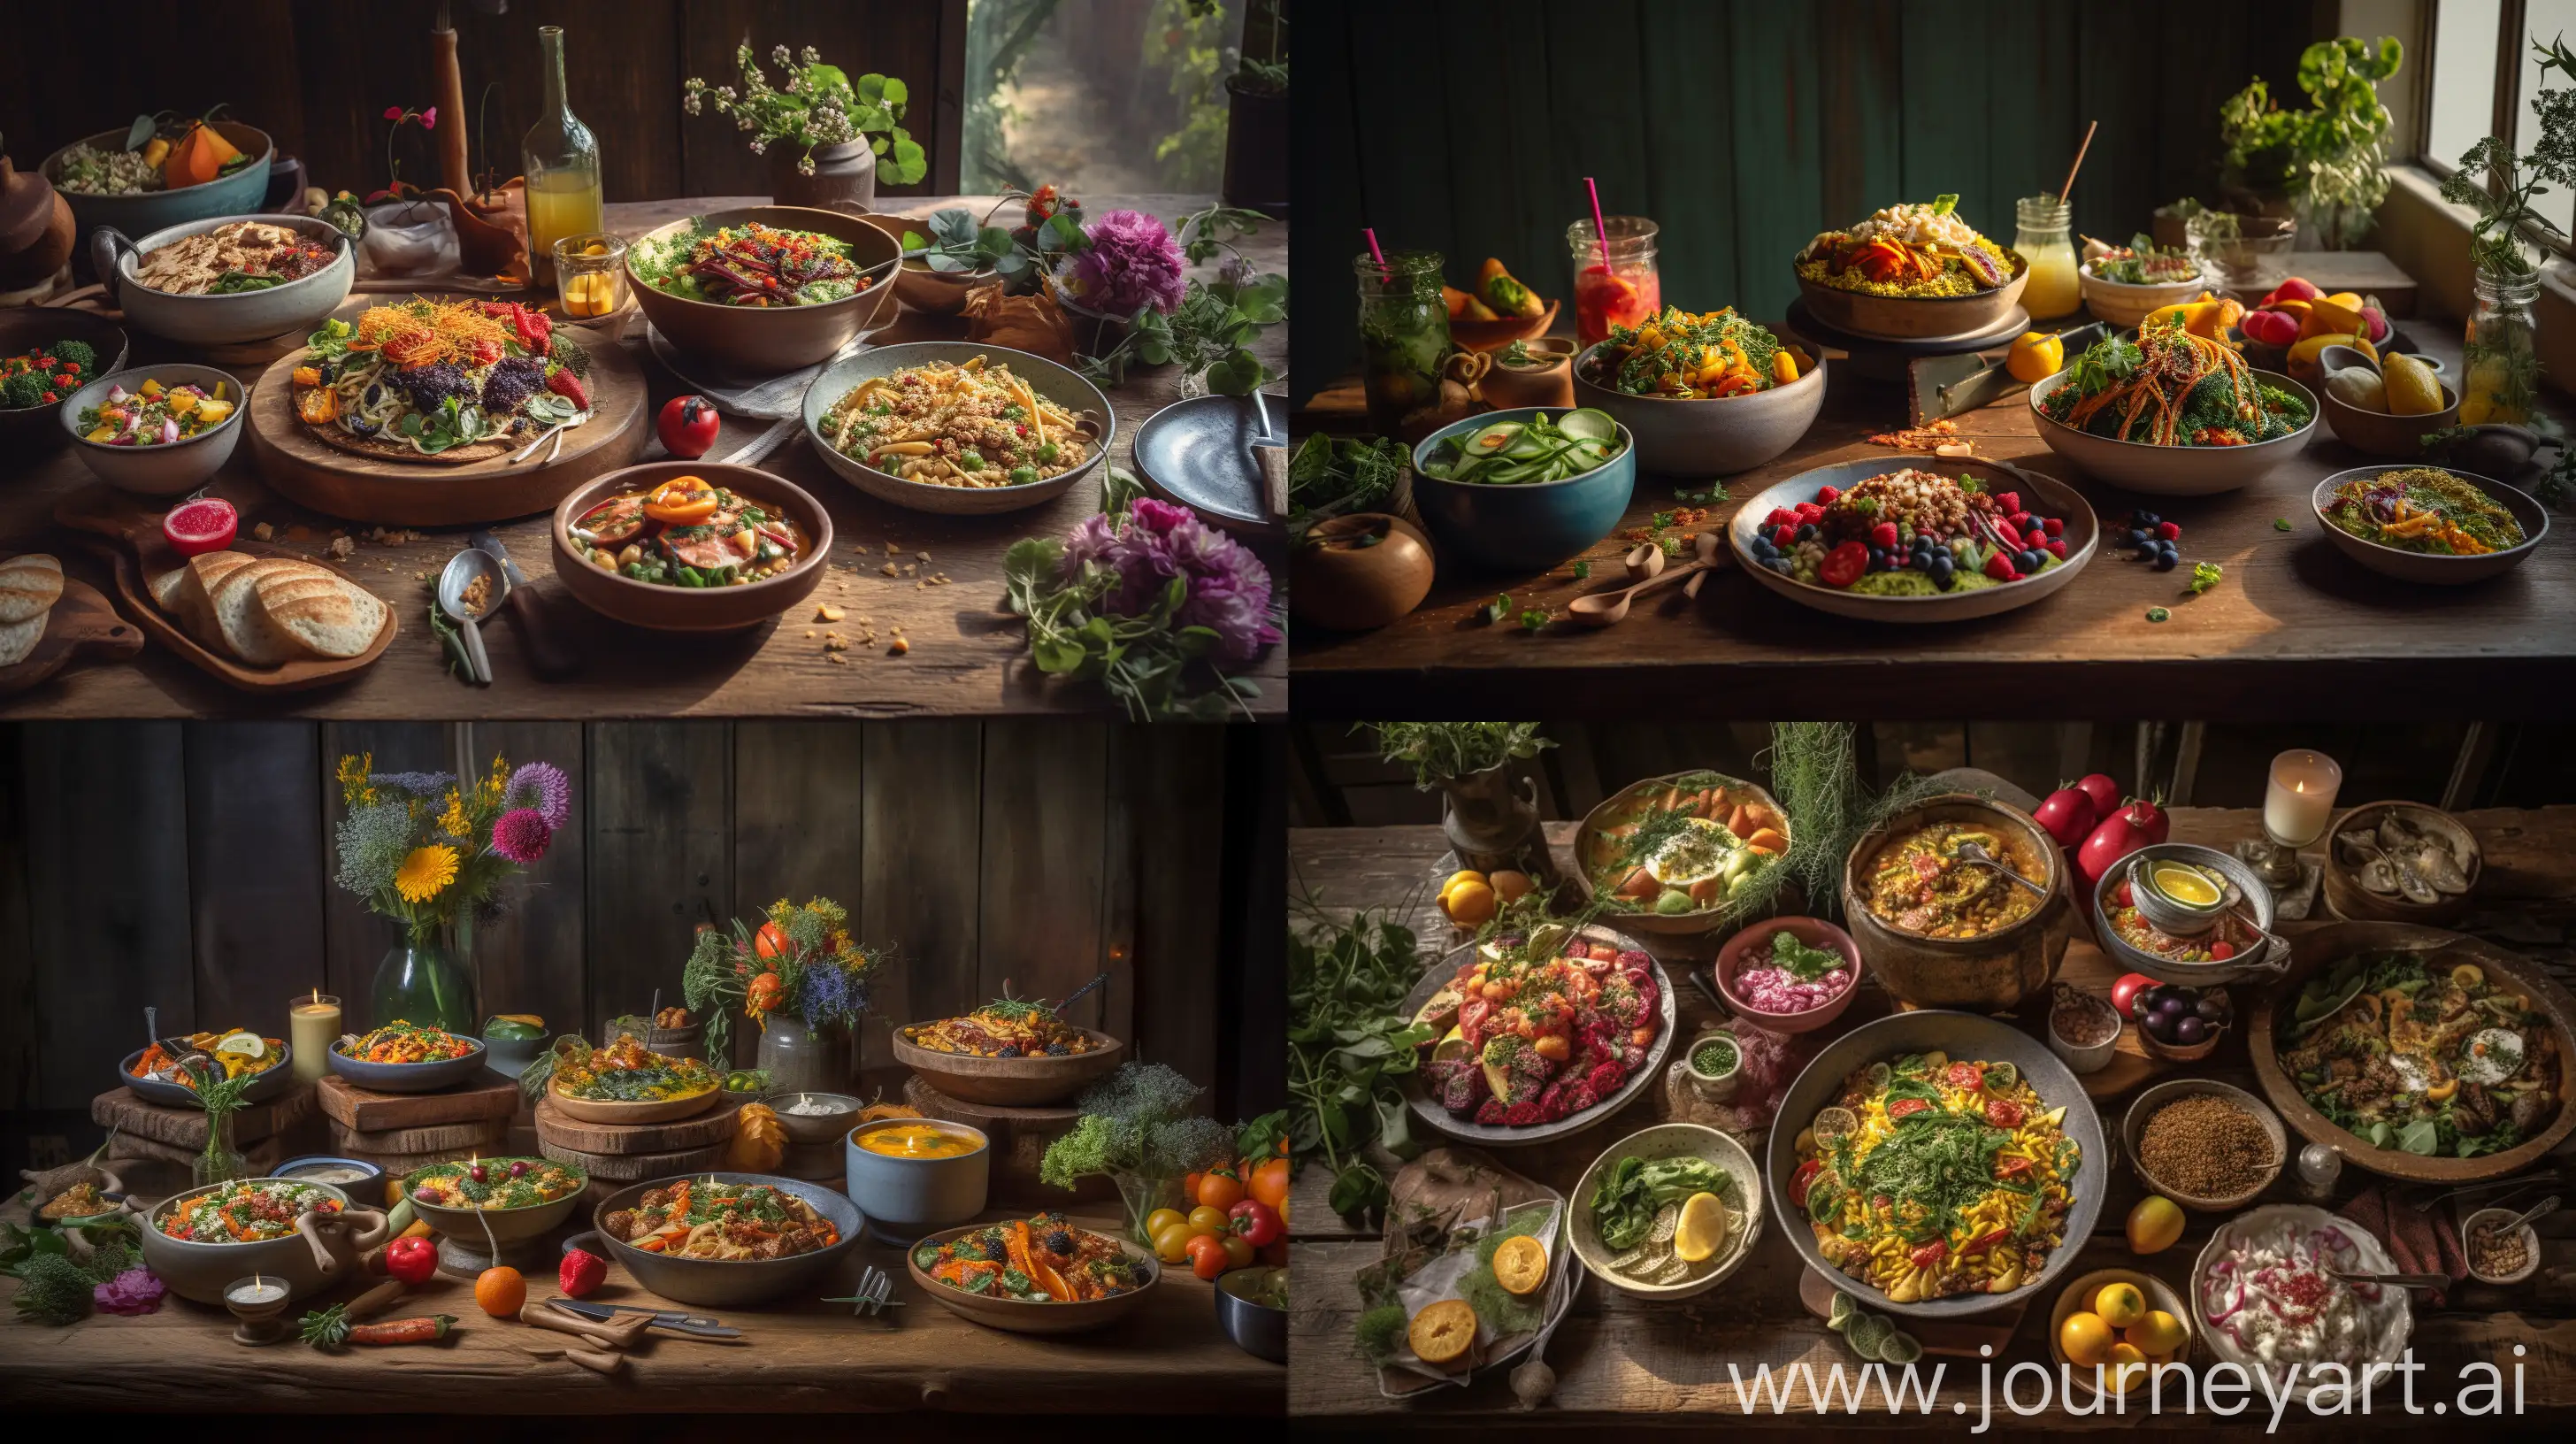 Colorful-PlantBased-Dishes-on-Rustic-Wooden-Table-with-Fresh-Ingredients